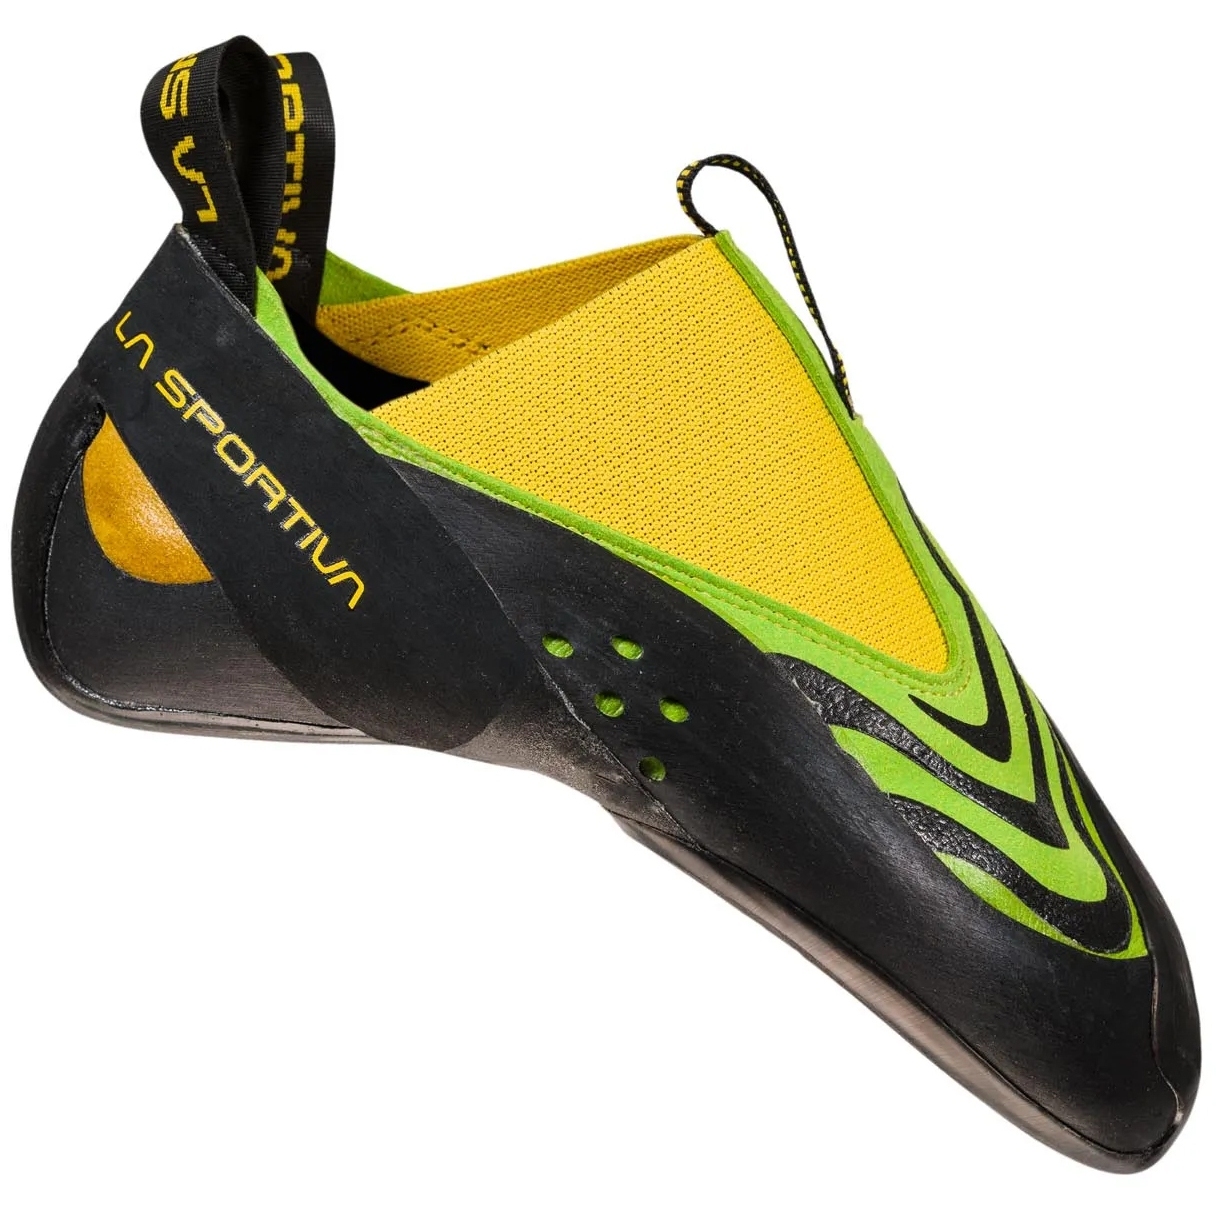 Picture of La Sportiva Speedster Climbing Shoes - Lime/Yellow